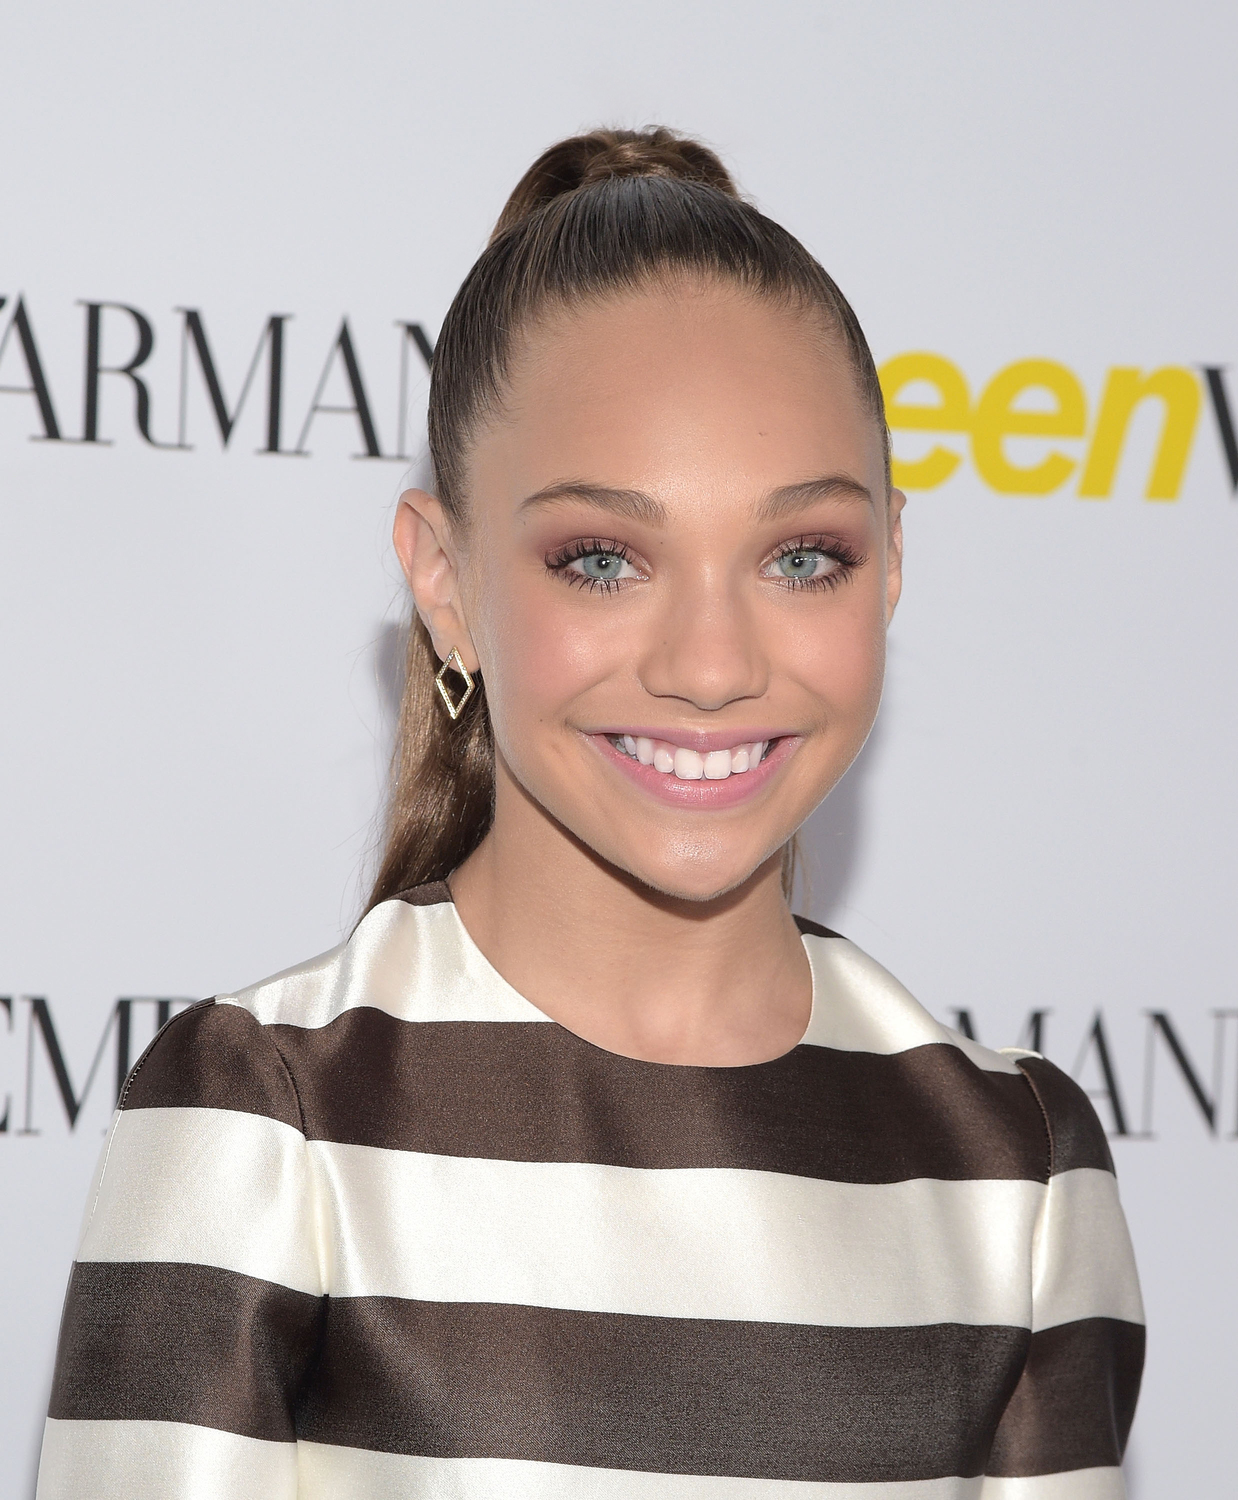 13-Year-Old Dancer, Maddie Ziegler, New Judge on ‘So You Think You Can Dance; The Next Generation’